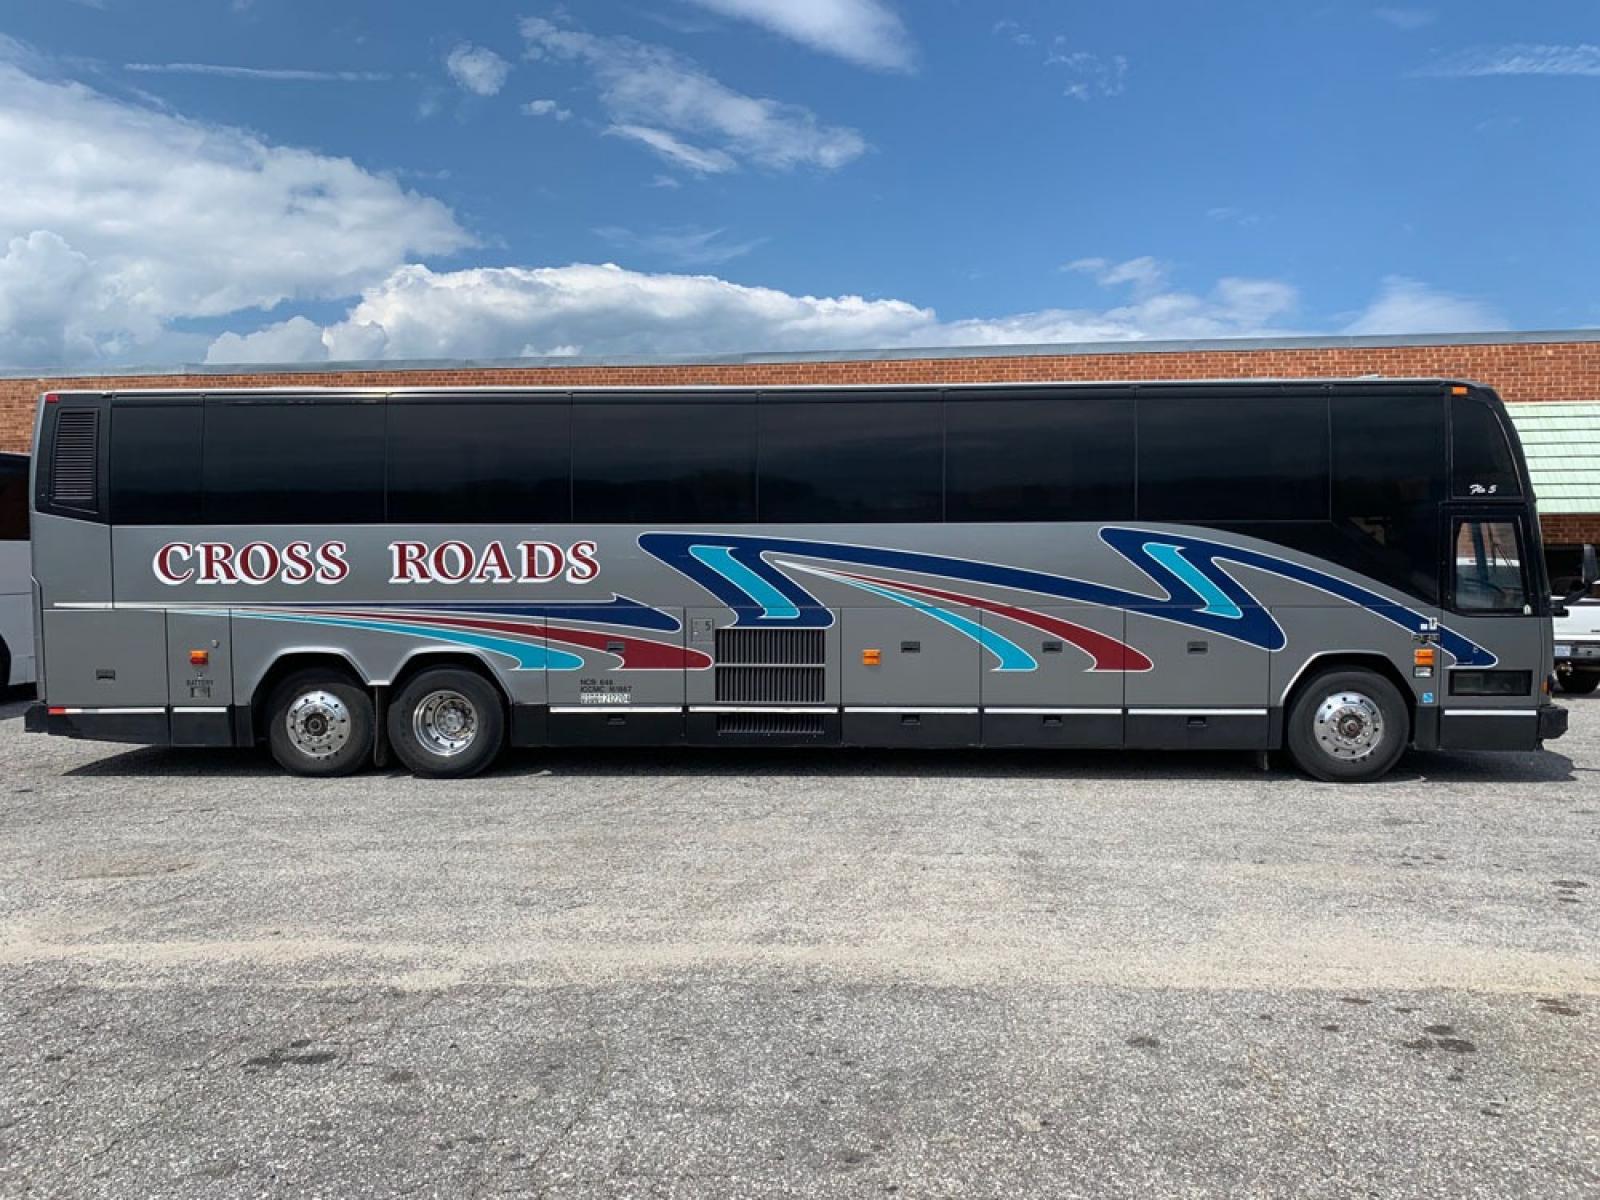 1998 Prevost HS-45 with an Detroit Diesel Series 60 engine, Allison transmission, 0.000000, 0.000000 - 1998 Prevost H3-45 - Series 60 Detroit Diesel - Allison Automatic Transmission - 45' - 56 Passengers -Enclosed Parcel Racks - 5 Flat Screens and DVD - Photo #1